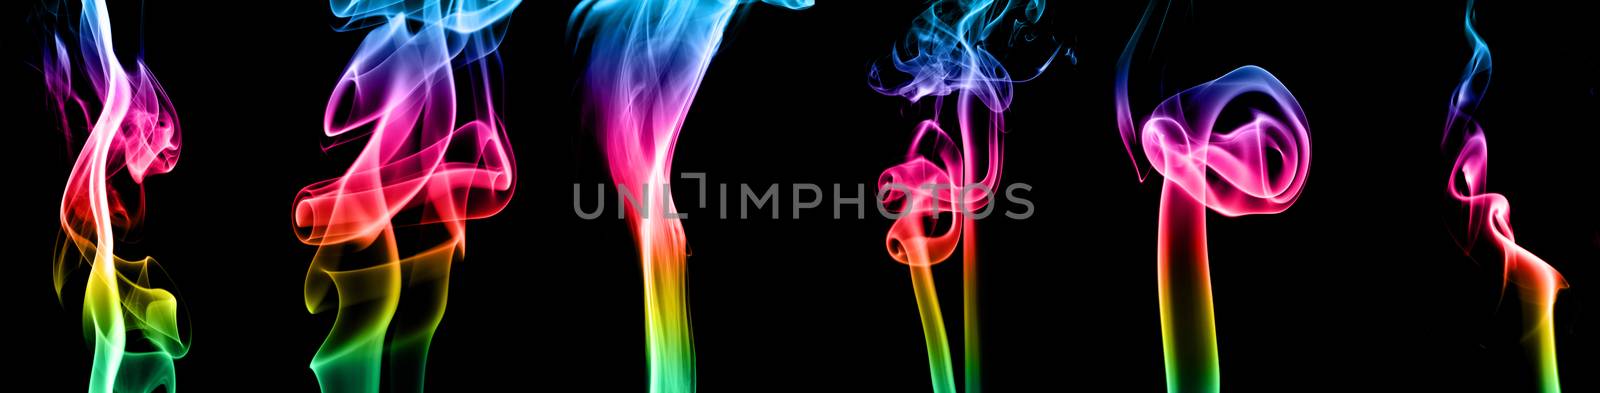 Multicolored smoke collection by Nneirda